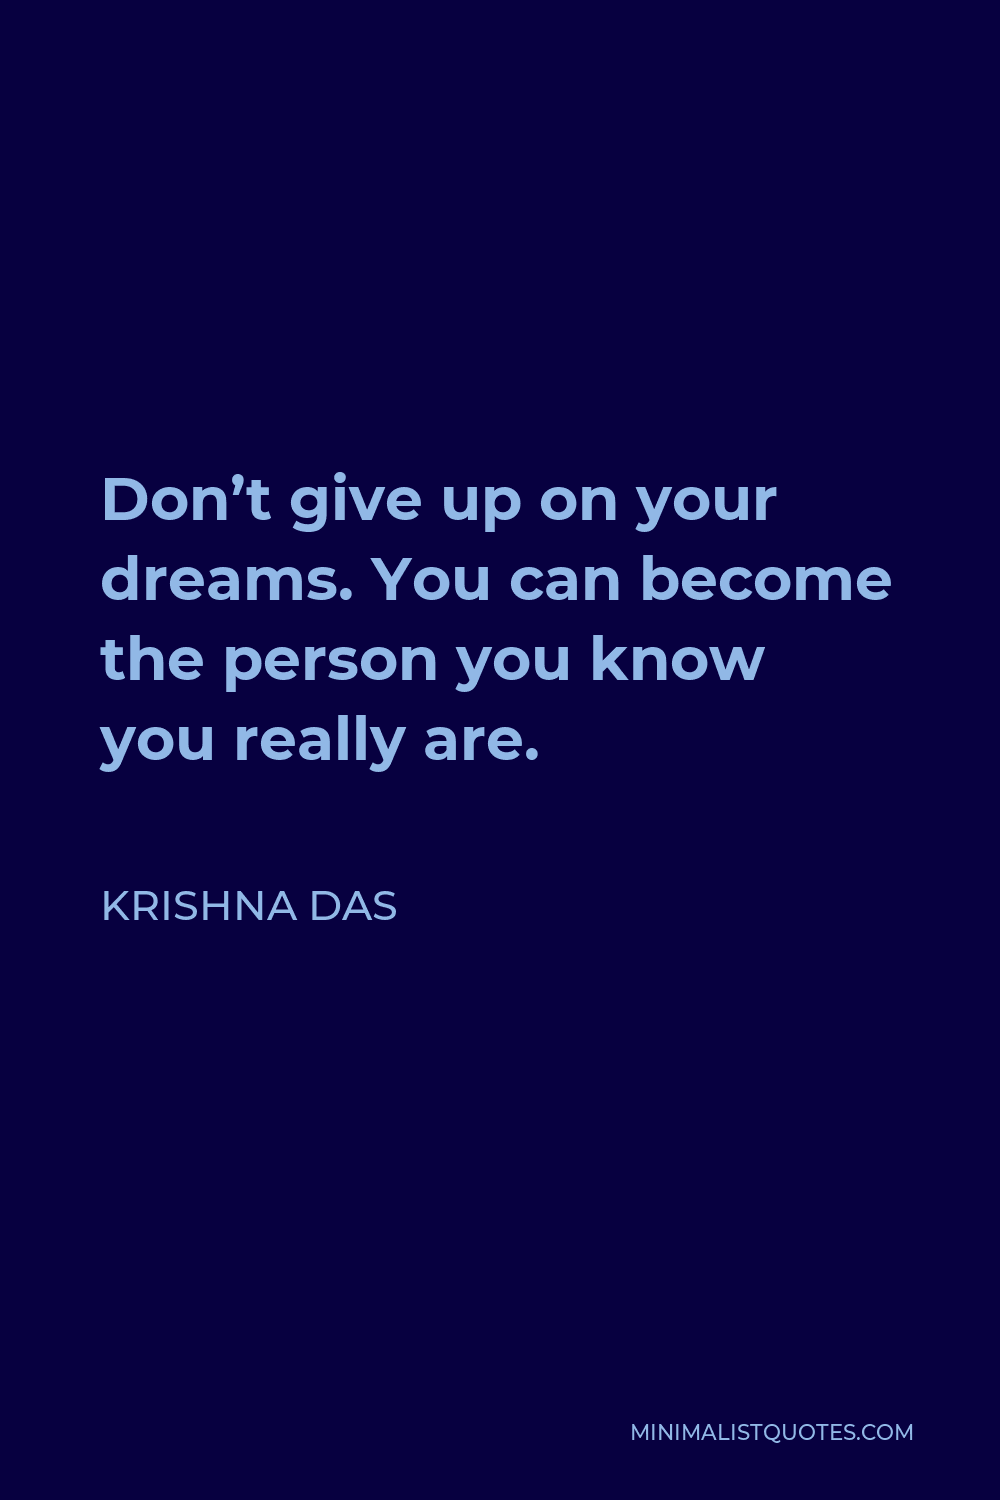 Krishna Das Quote - Don’t give up on your dreams. You can become the person you know you really are.